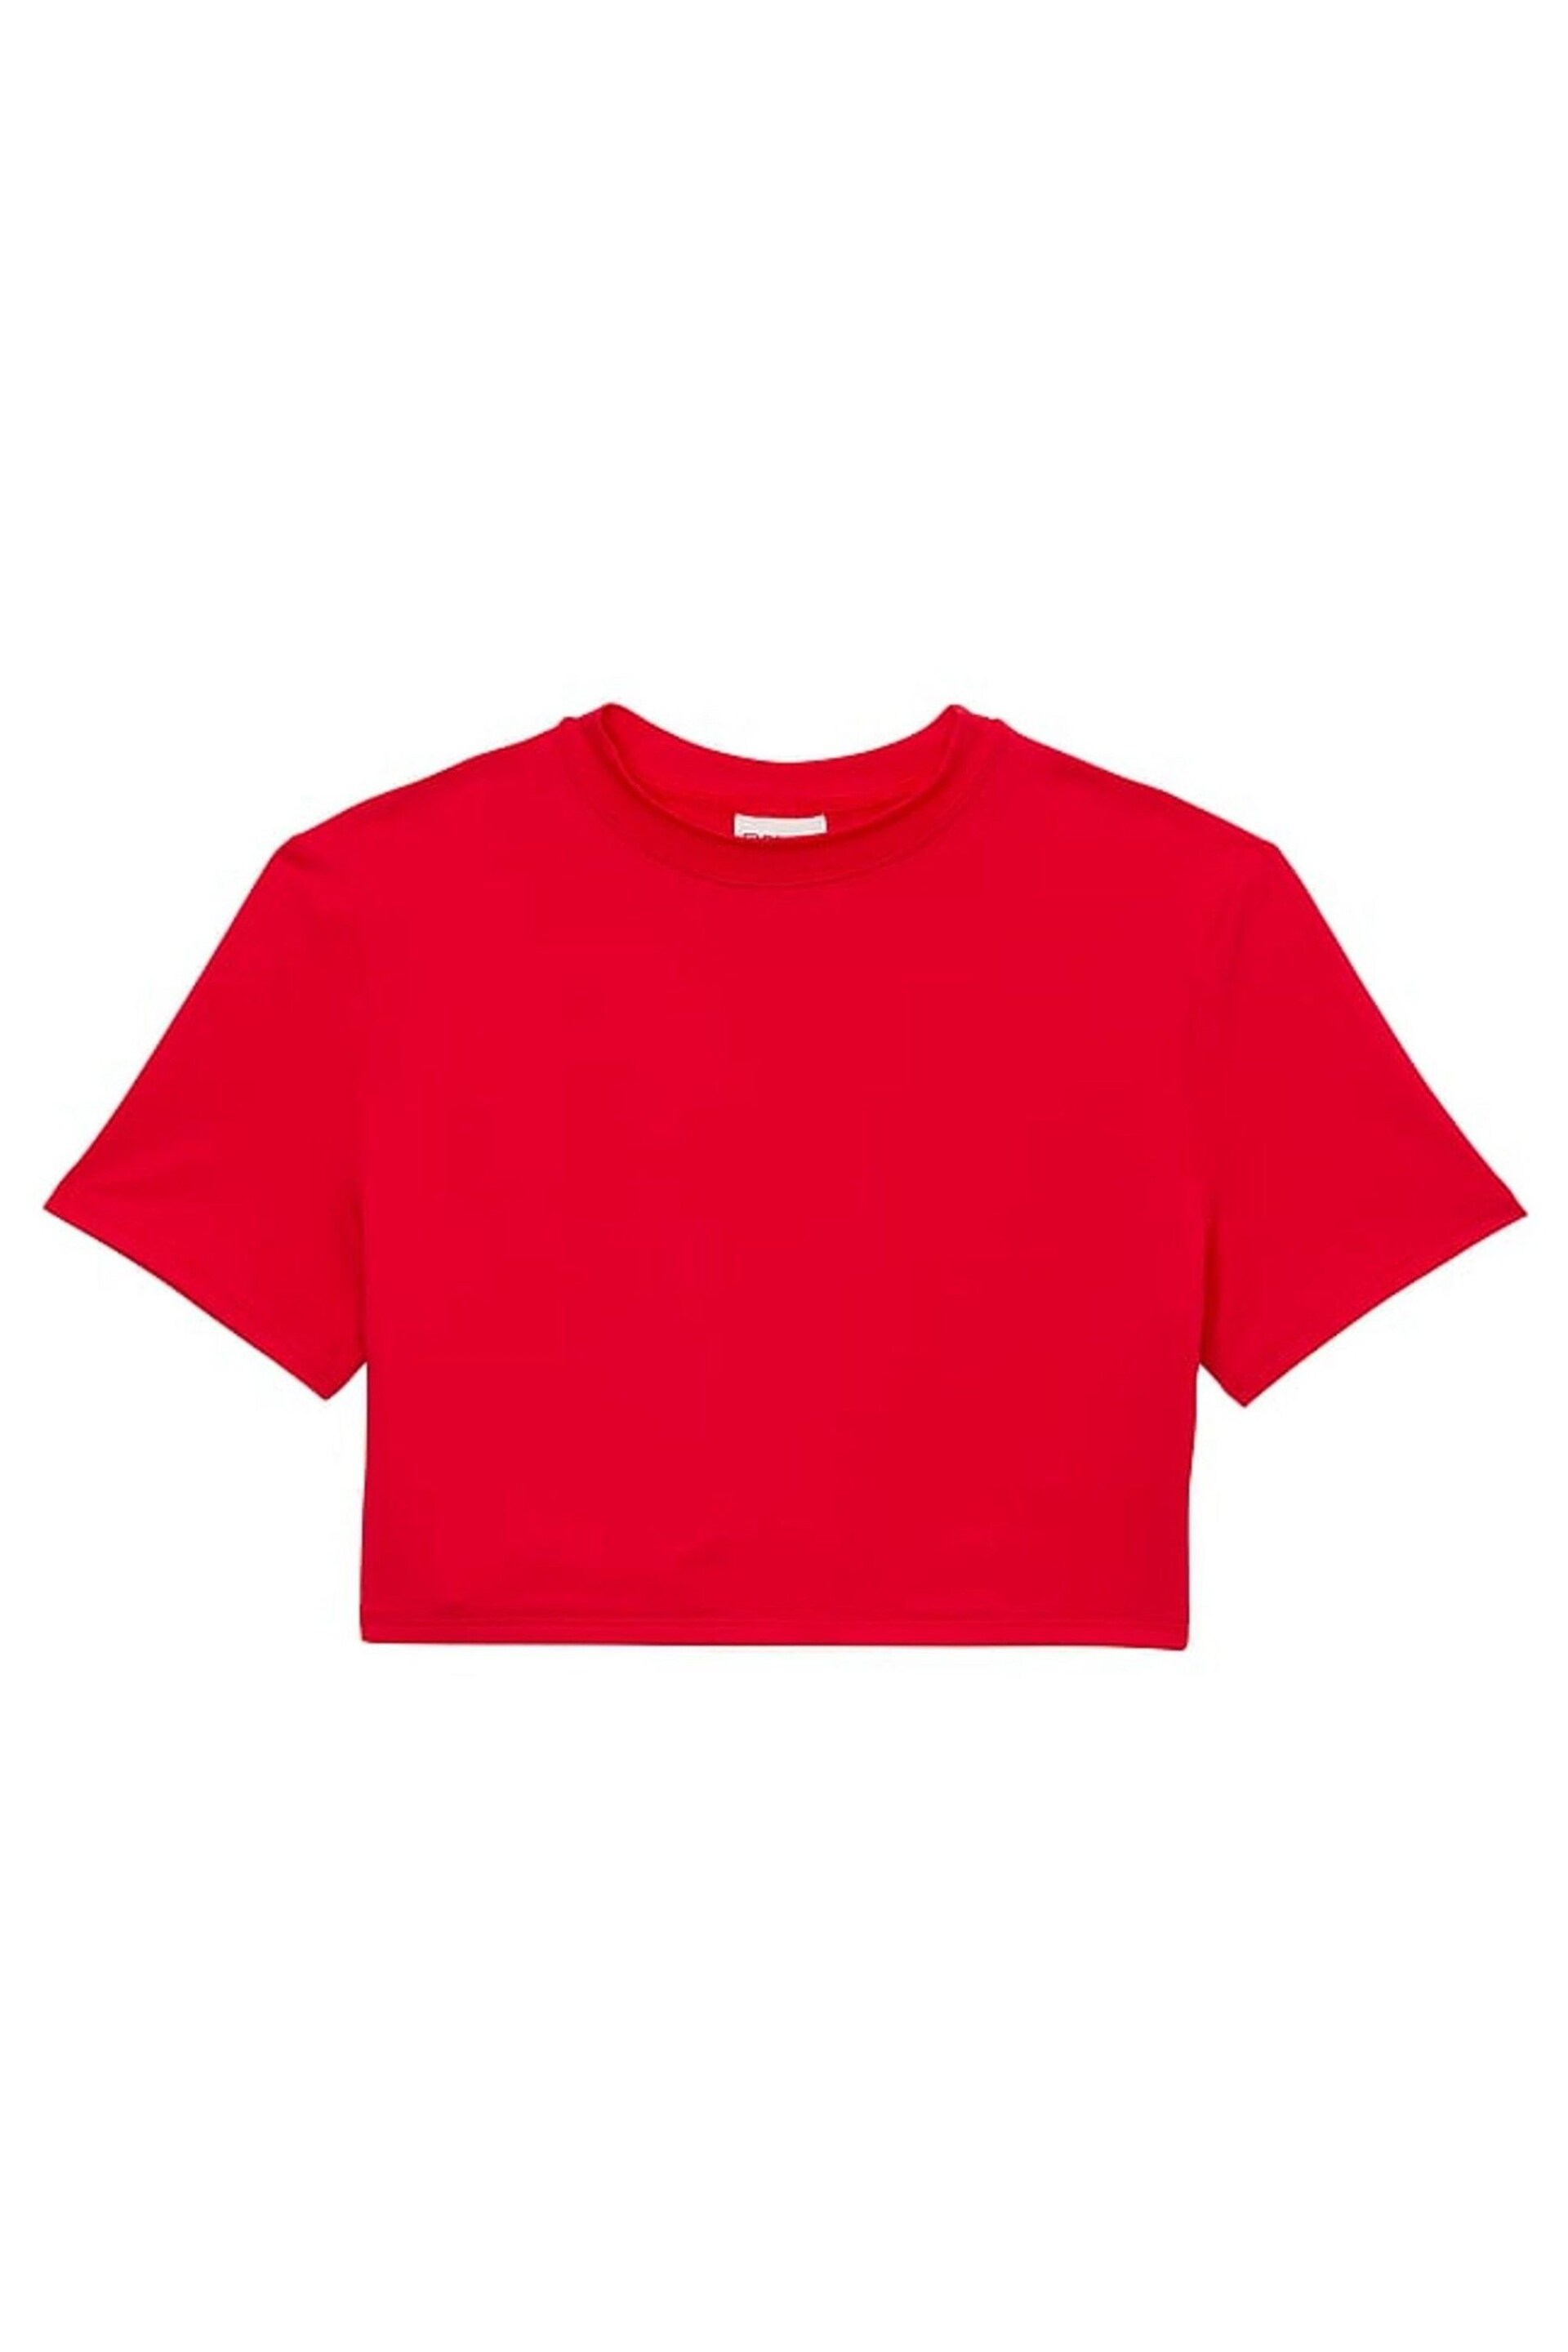 Victoria's Secret PINK Red Pepper Soft Stretch Cropped T-Shirt - Image 1 of 1